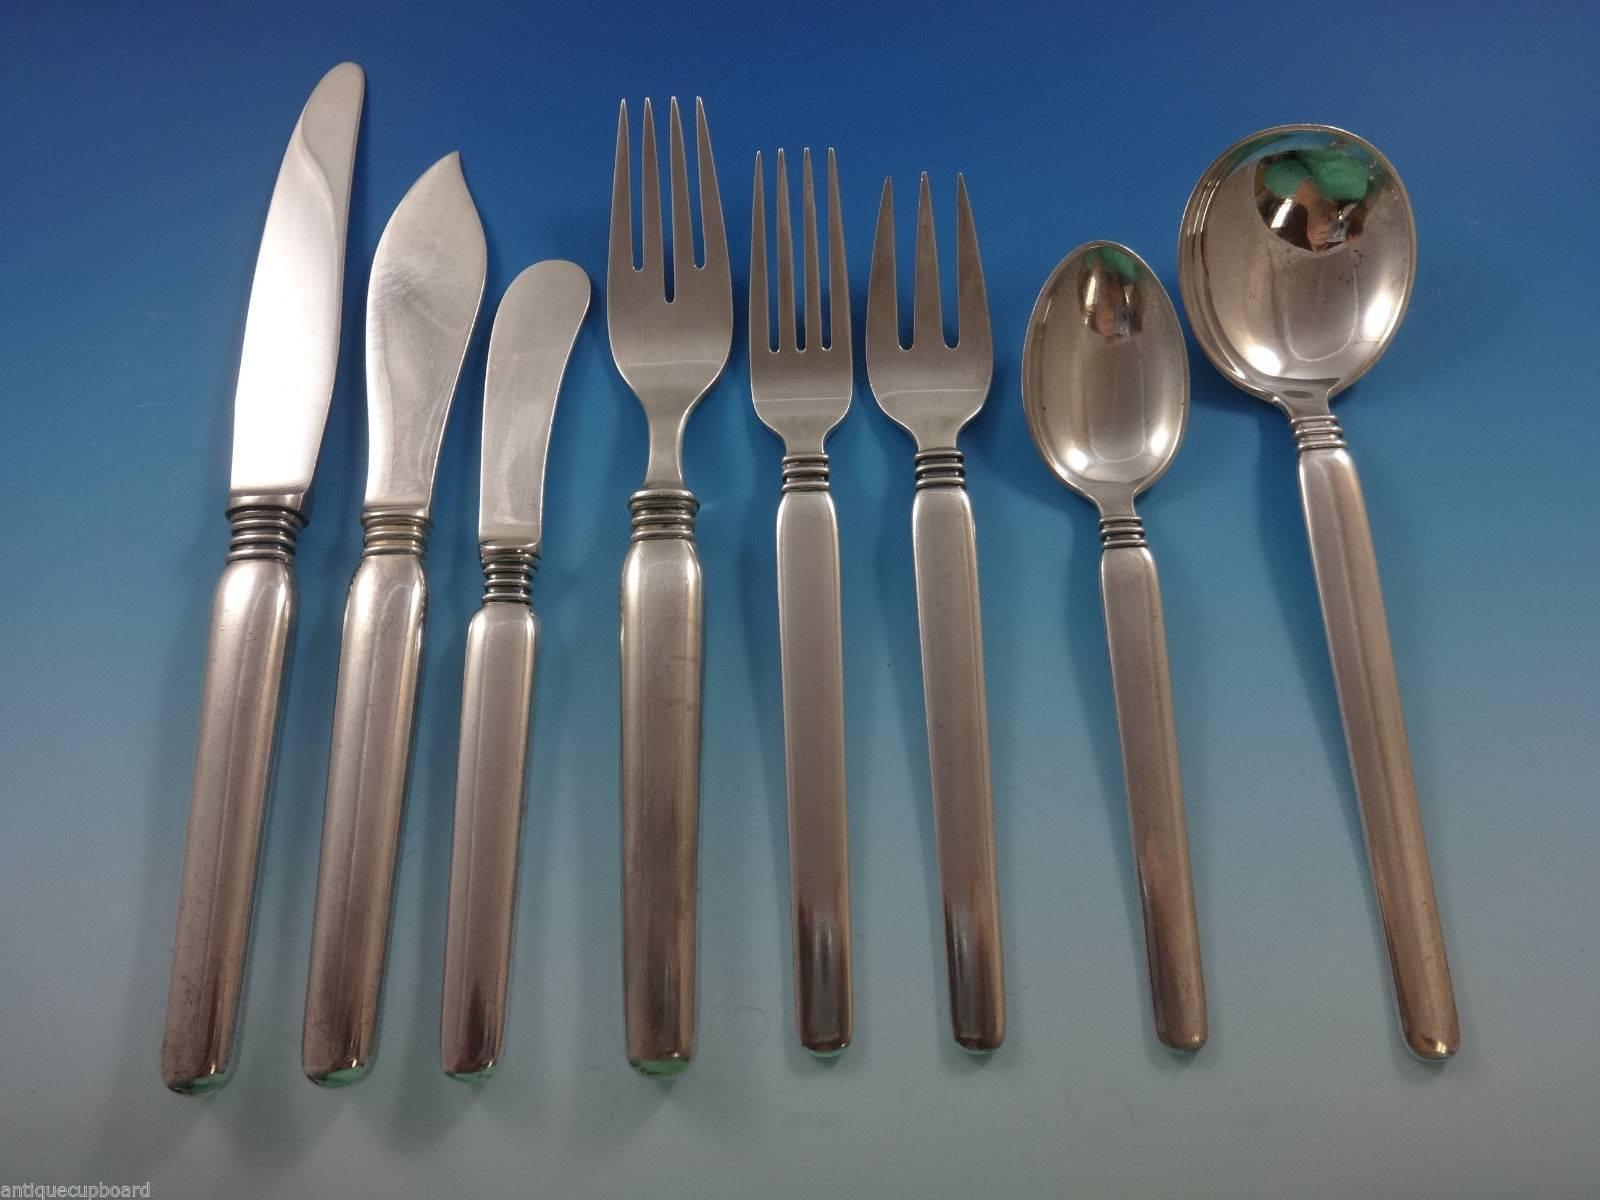 Windsor by W & S Sorensen Sterling Silver Danish Flatware Set 8 Service. This set includes: 8 KNIVES, 8 1/2", 8 FORKS, 6 3/4", 8 SALAD FORKS, 3-TINE, 6 1/2", 8 TEASPOONS, 6", 8 CREAM SOUP SPOONS, 6 3/4", 8 HOLLOW HANDLE